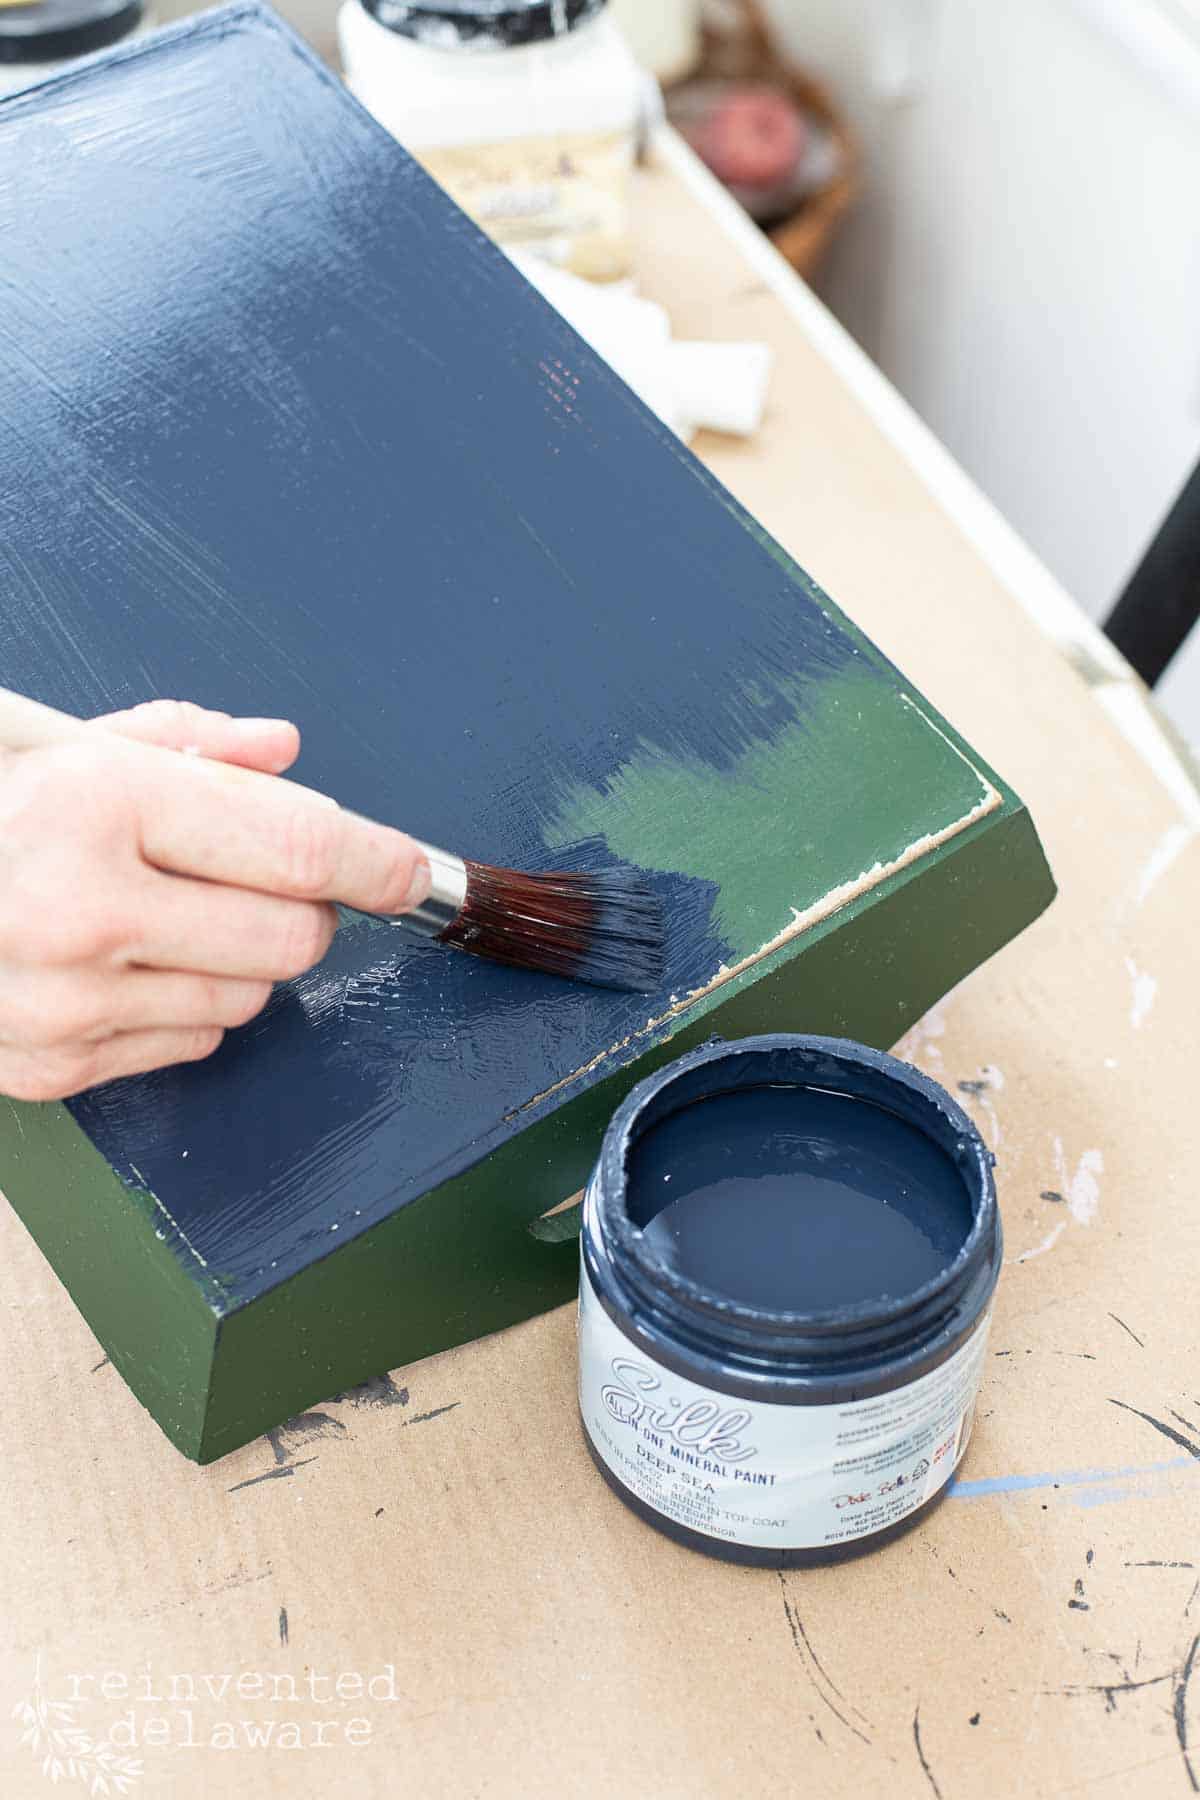 lady painting a thrift store tray in navy chalk paint for an upcycled home decor project